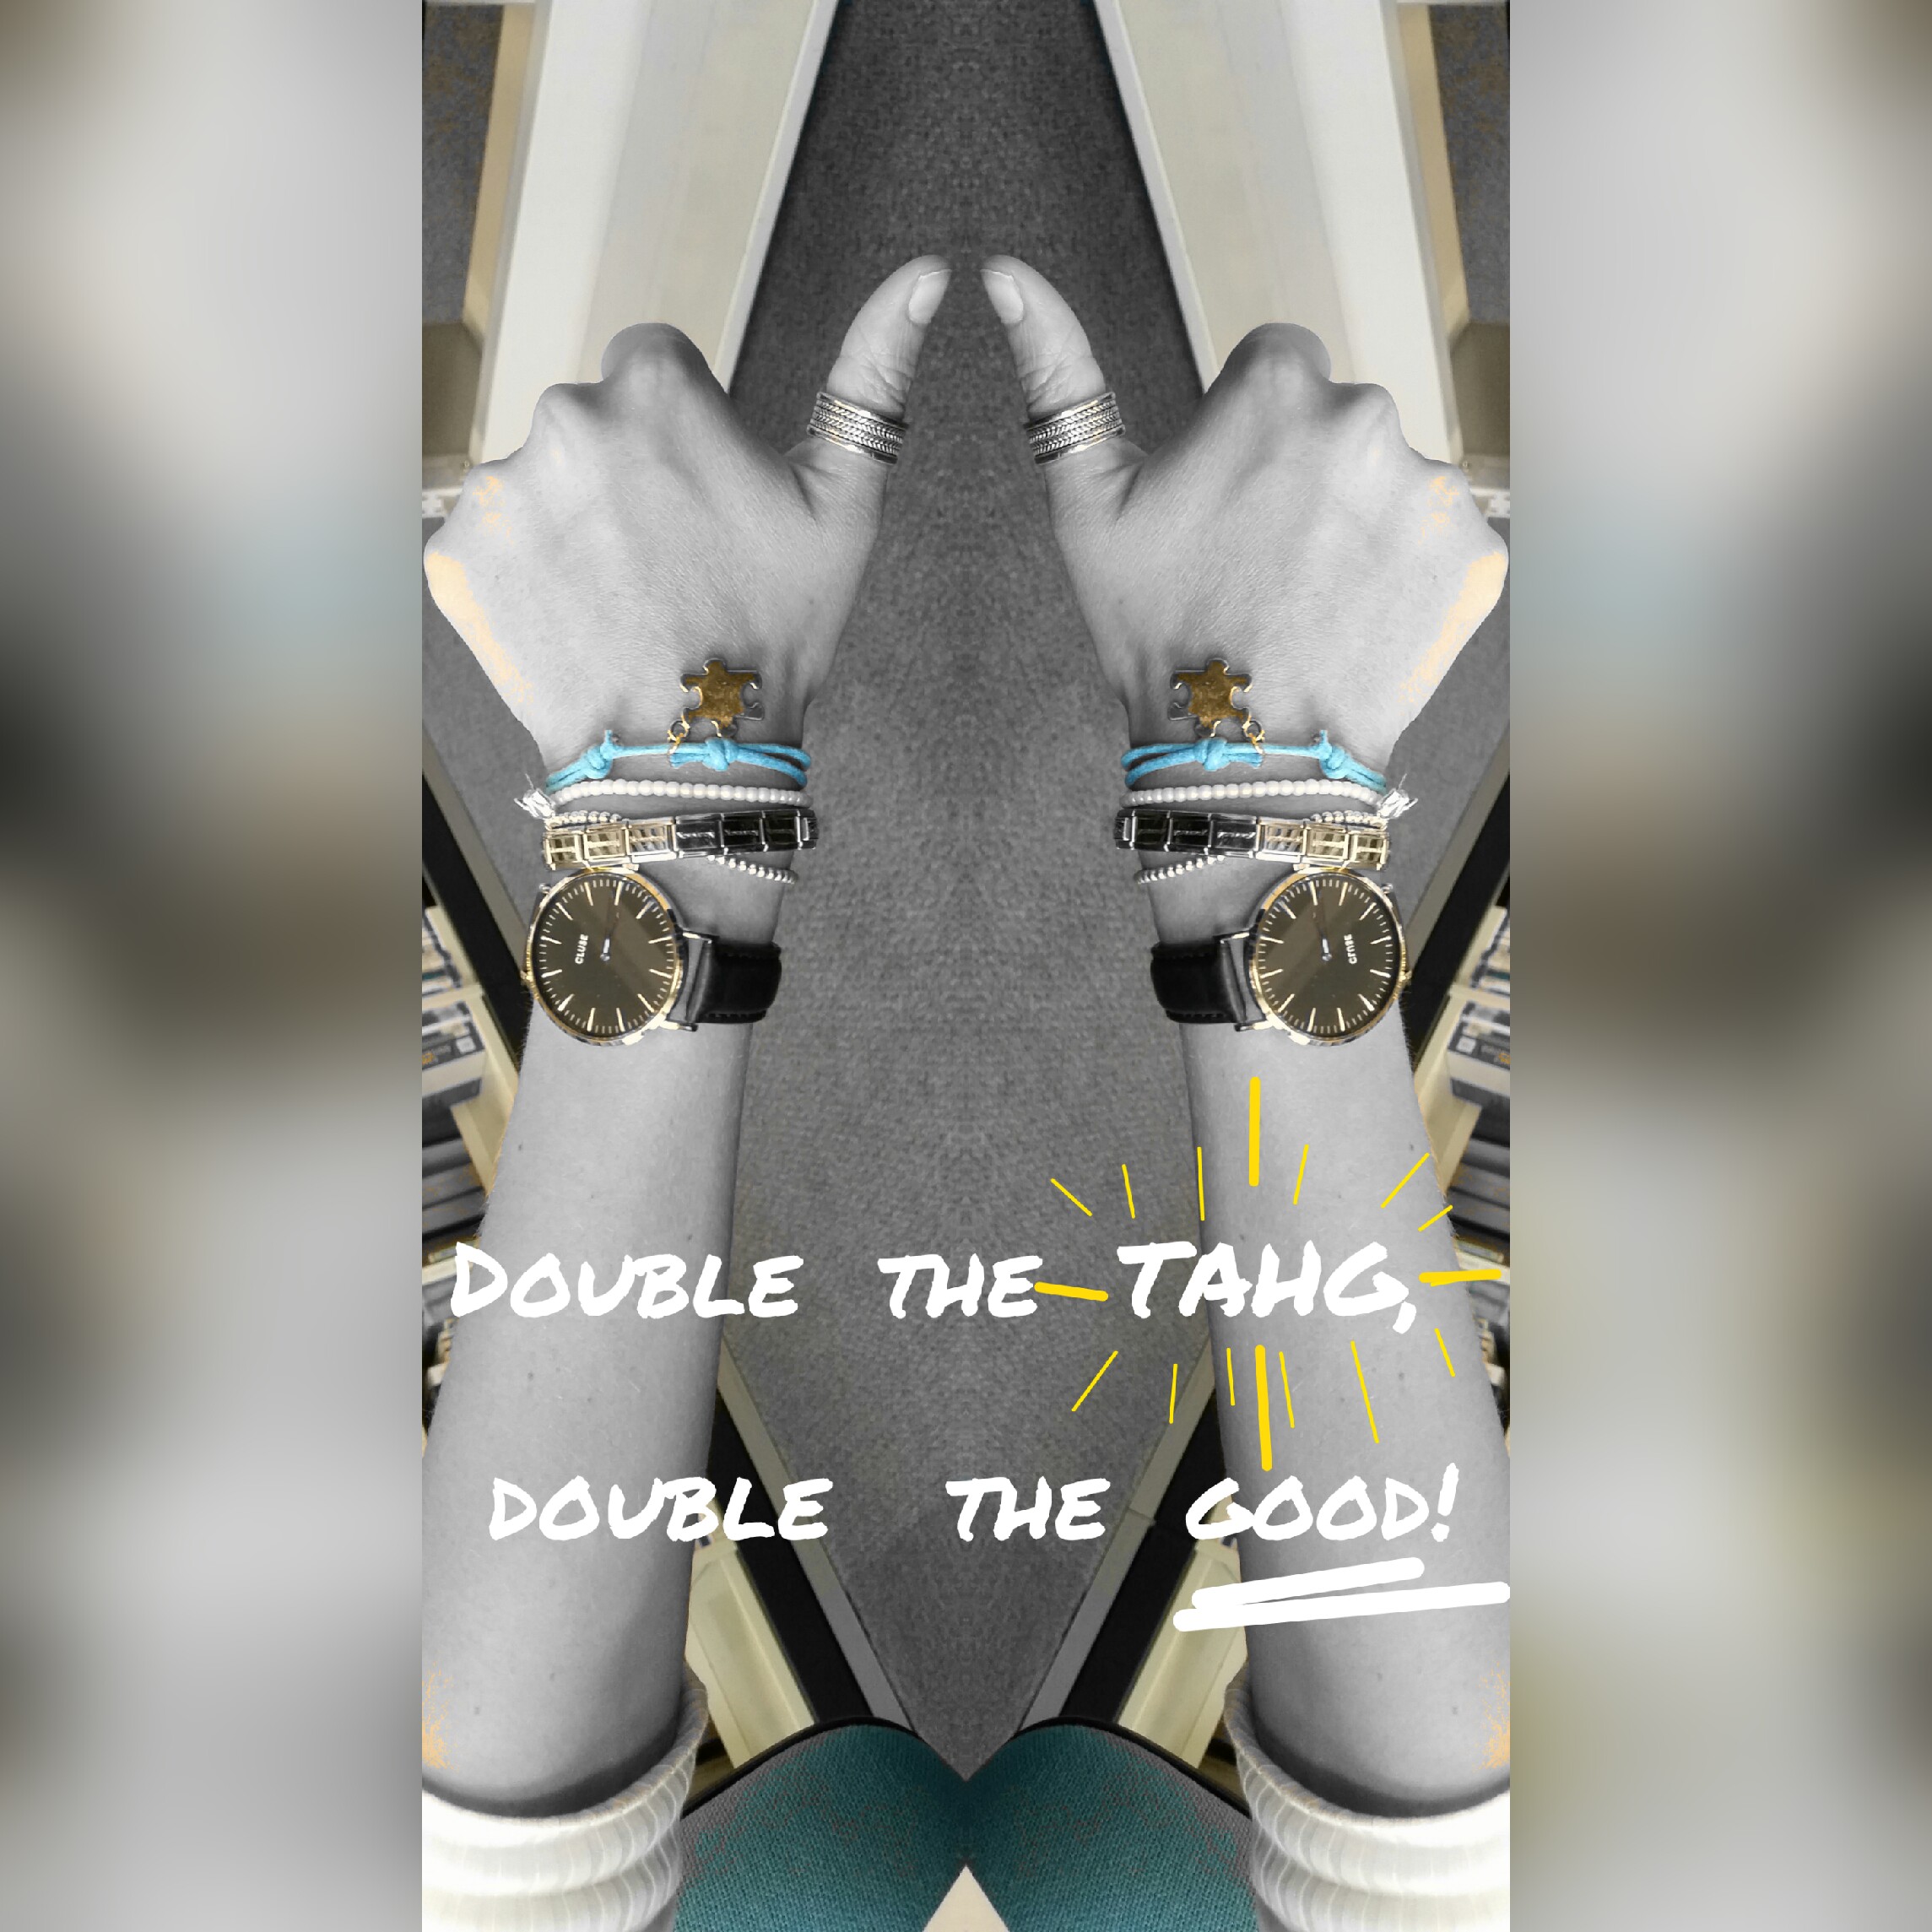 Double the Good